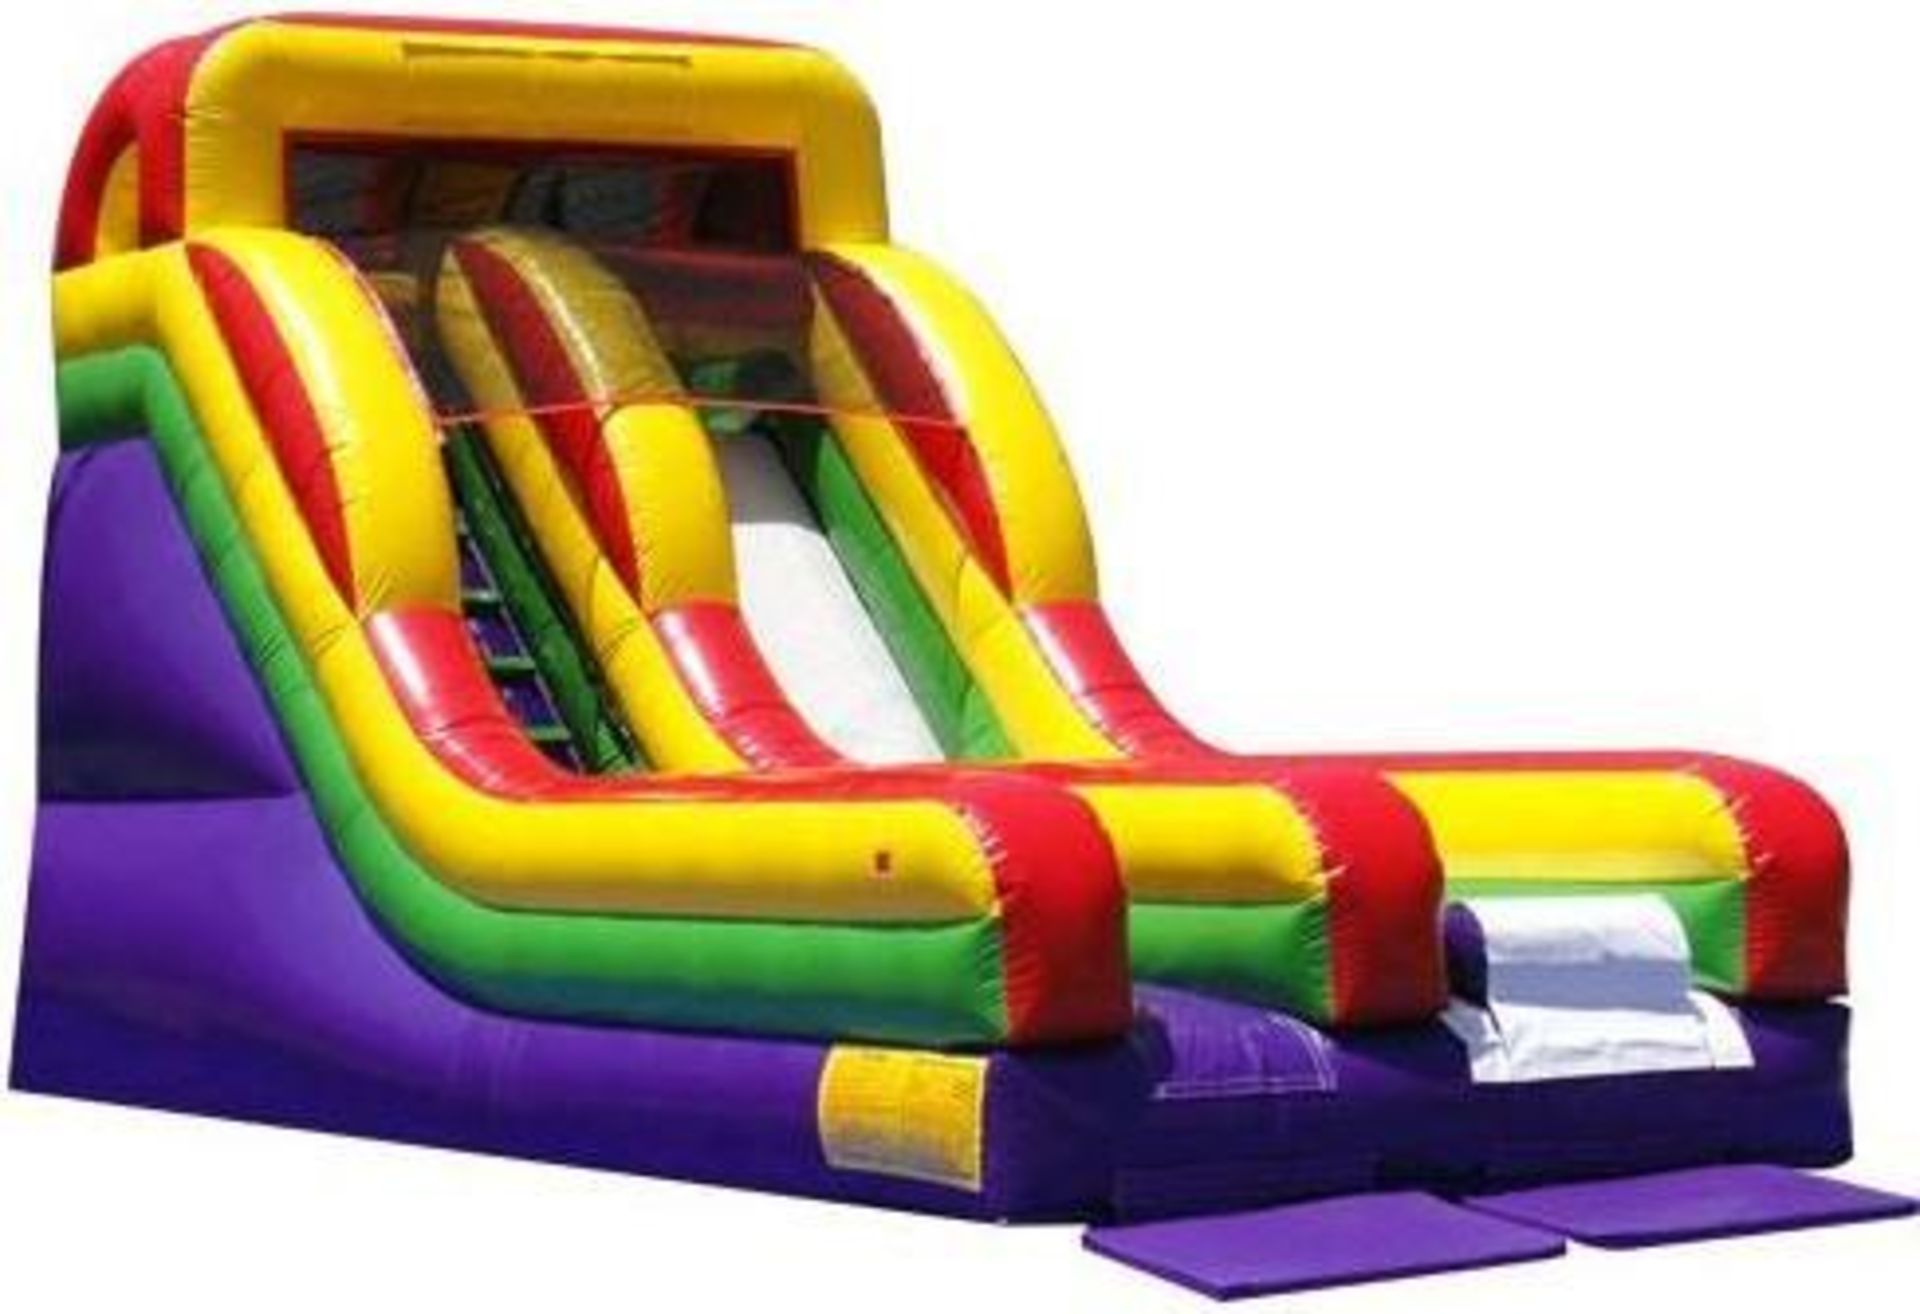 15' Dry Slide w/B-Air 1 HP Blower (Image For Reference Only, Actual Item May Look Different)(